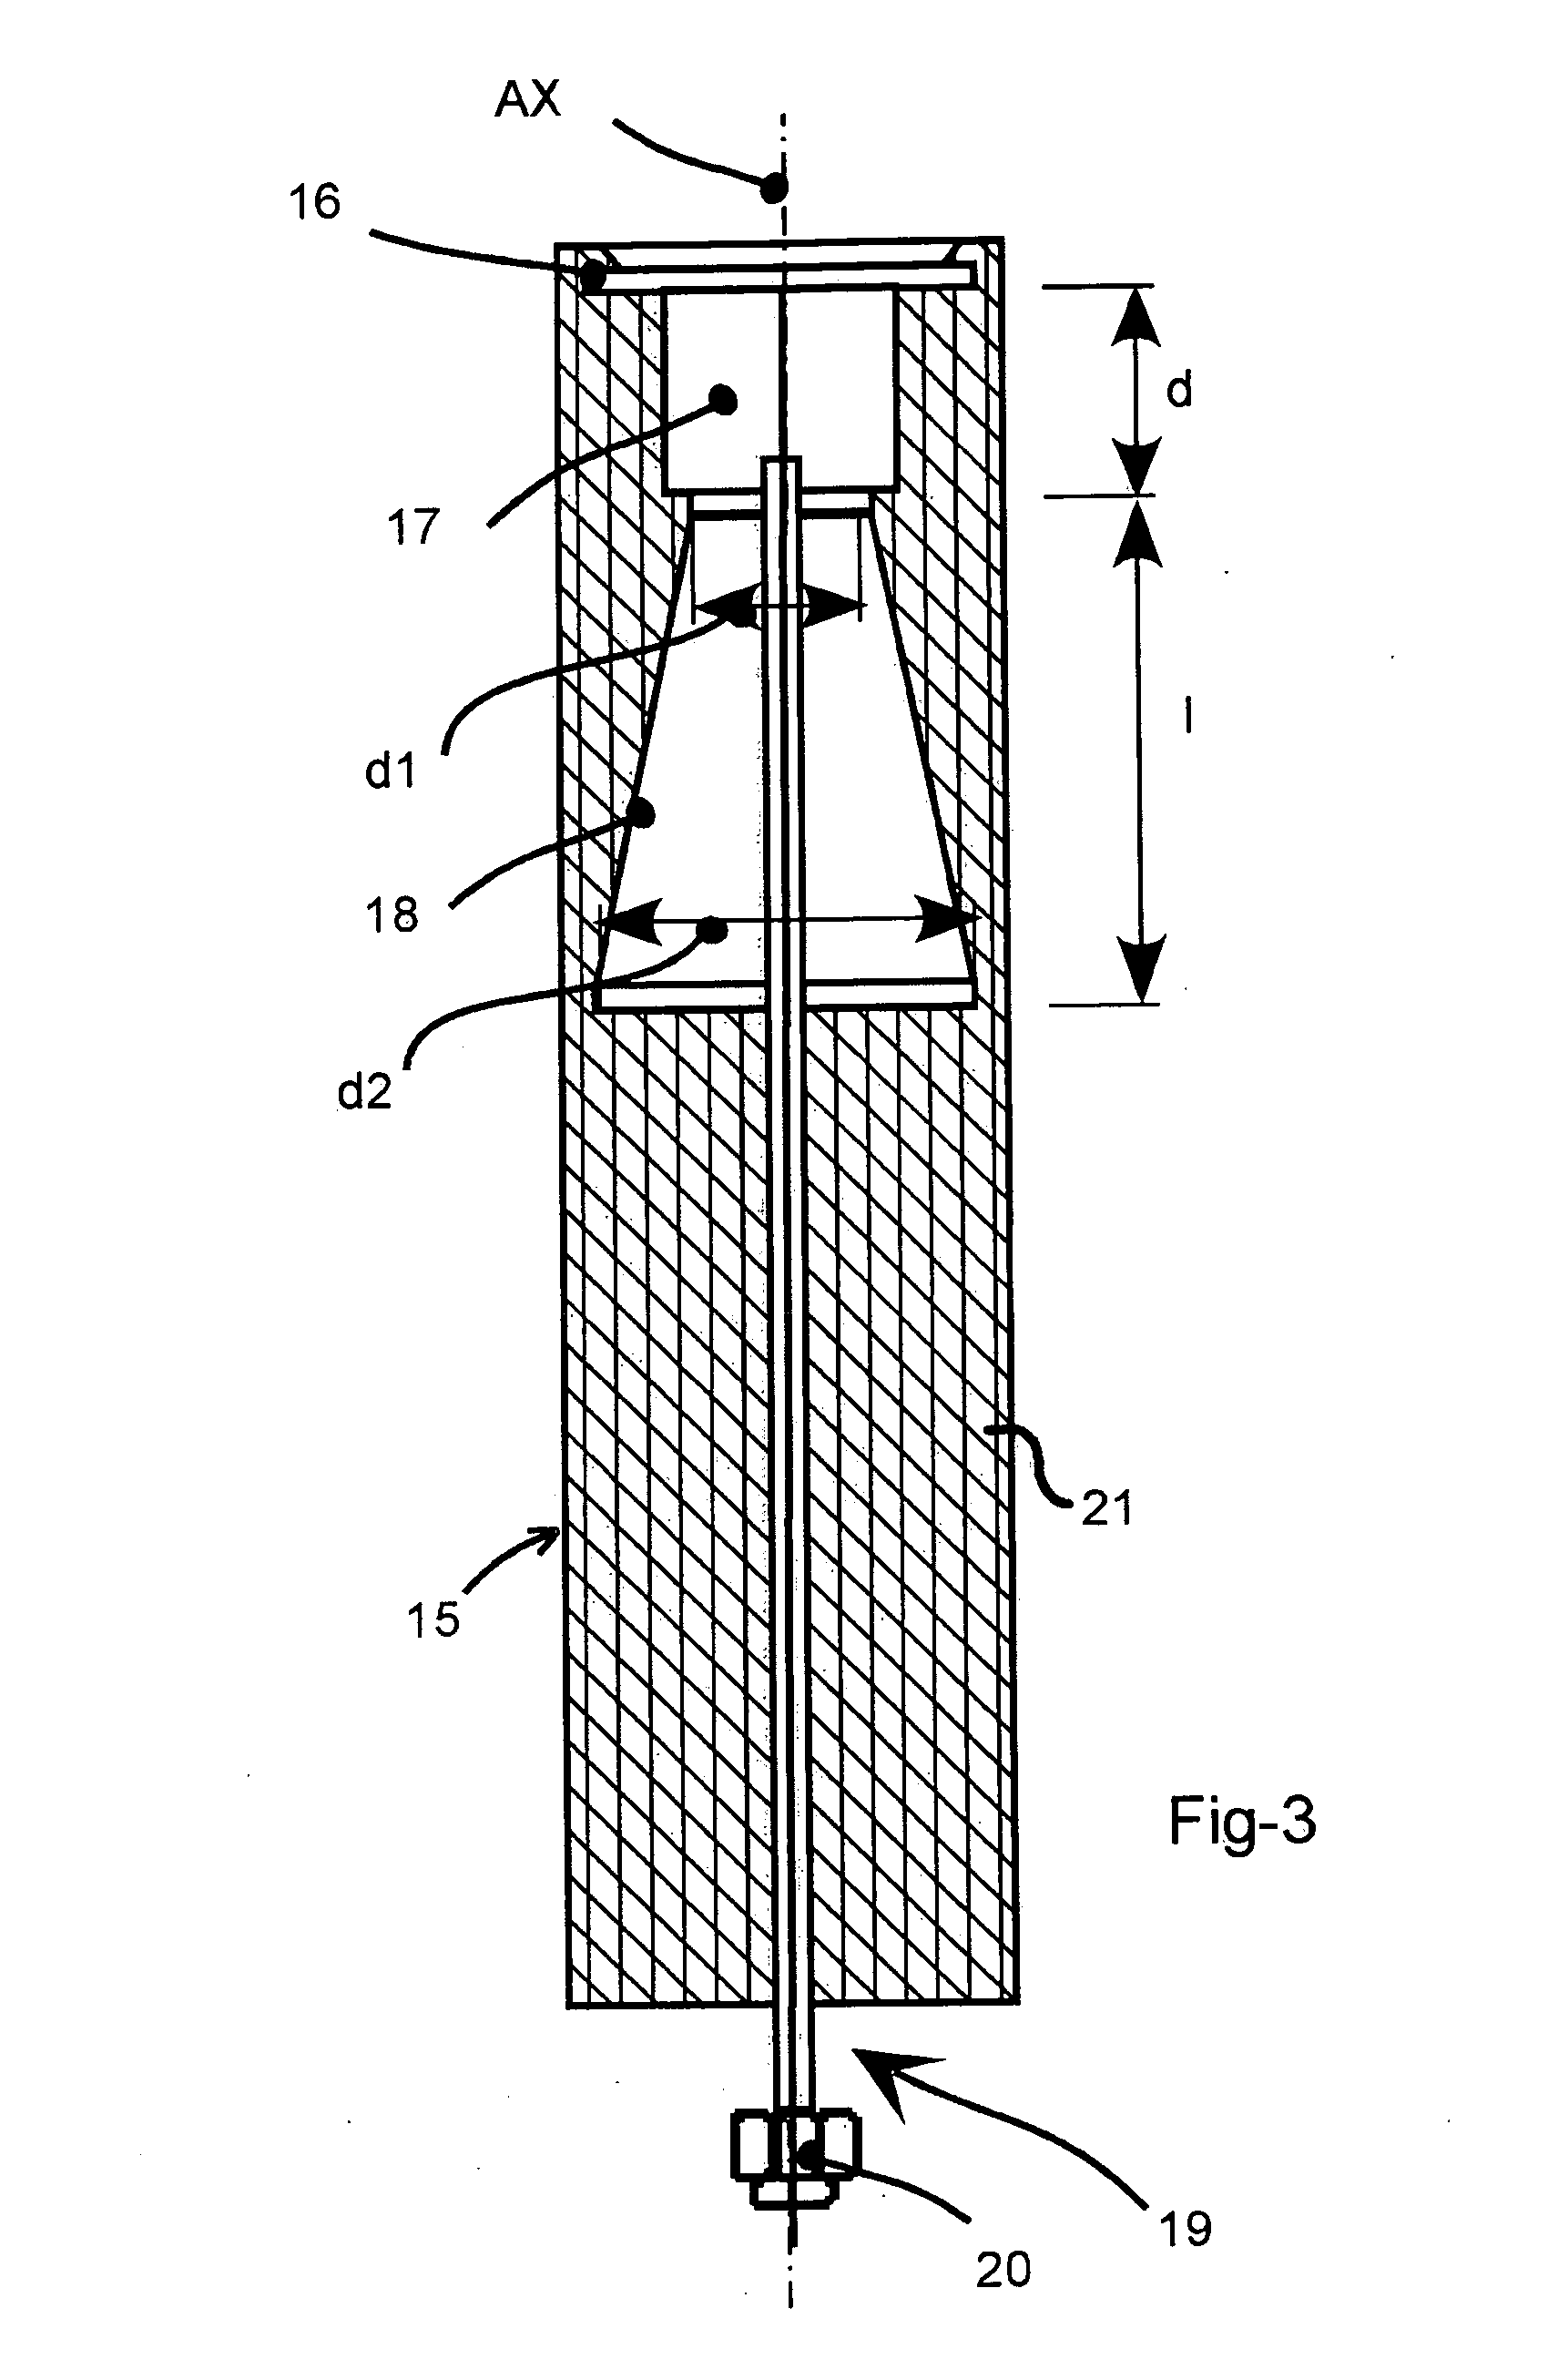 Antenna for detection of partial discharges in a chamber of an electrical instrument